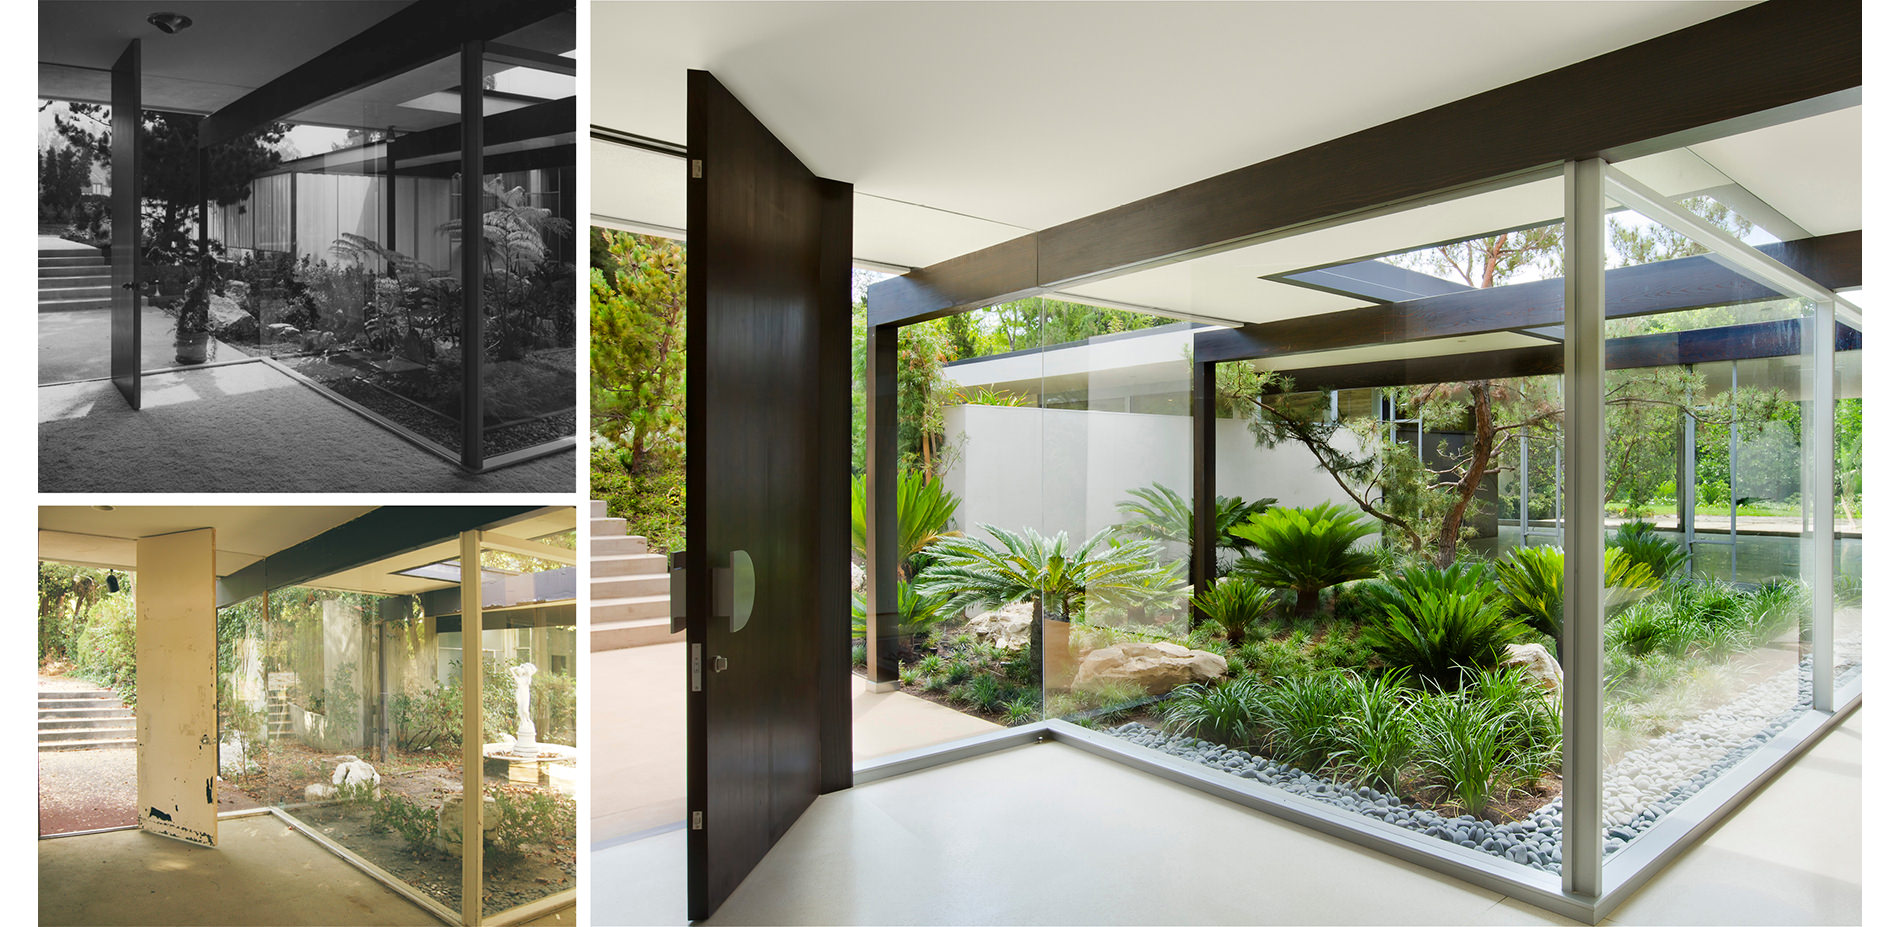 Comparison of 1955, 2011, and 2015 Interior Entry Foyer and Central Garden